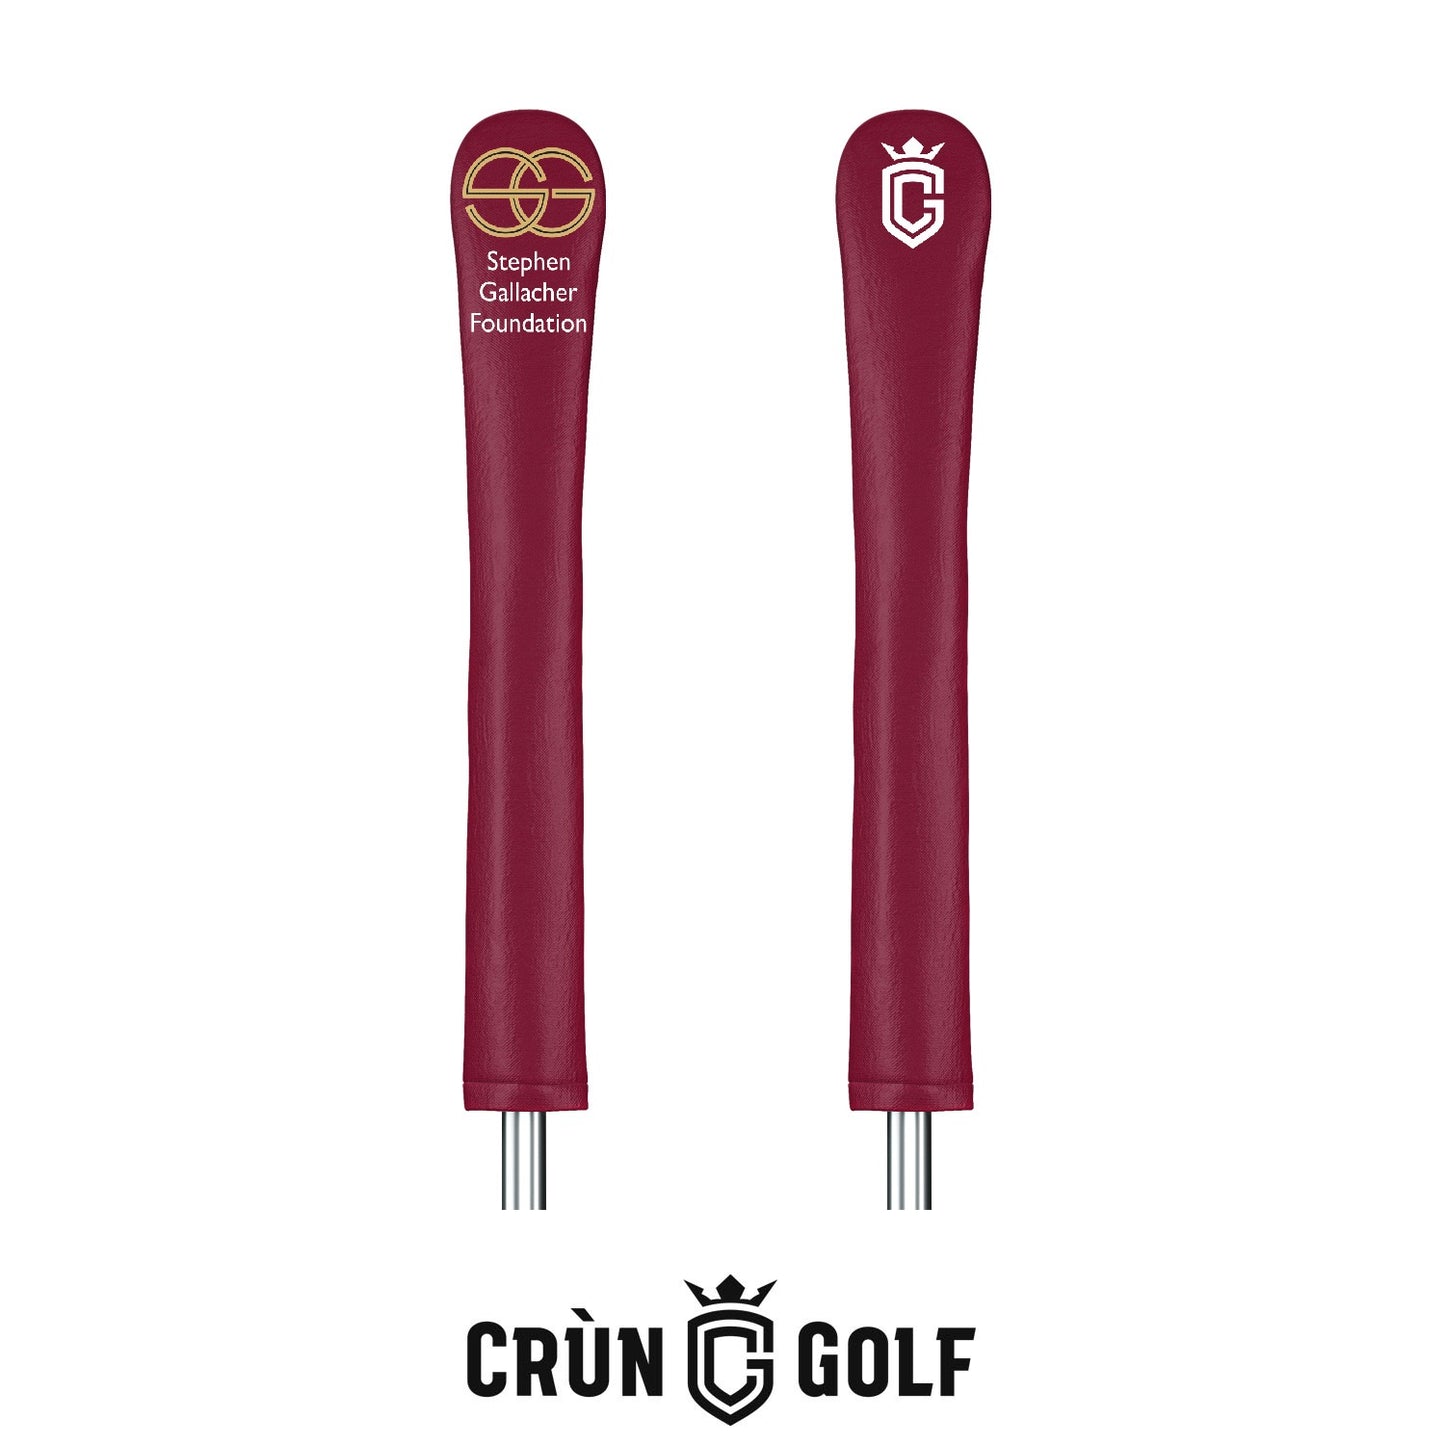 Stephen Gallacher Foundation Alignment Stick Cover - Maroon